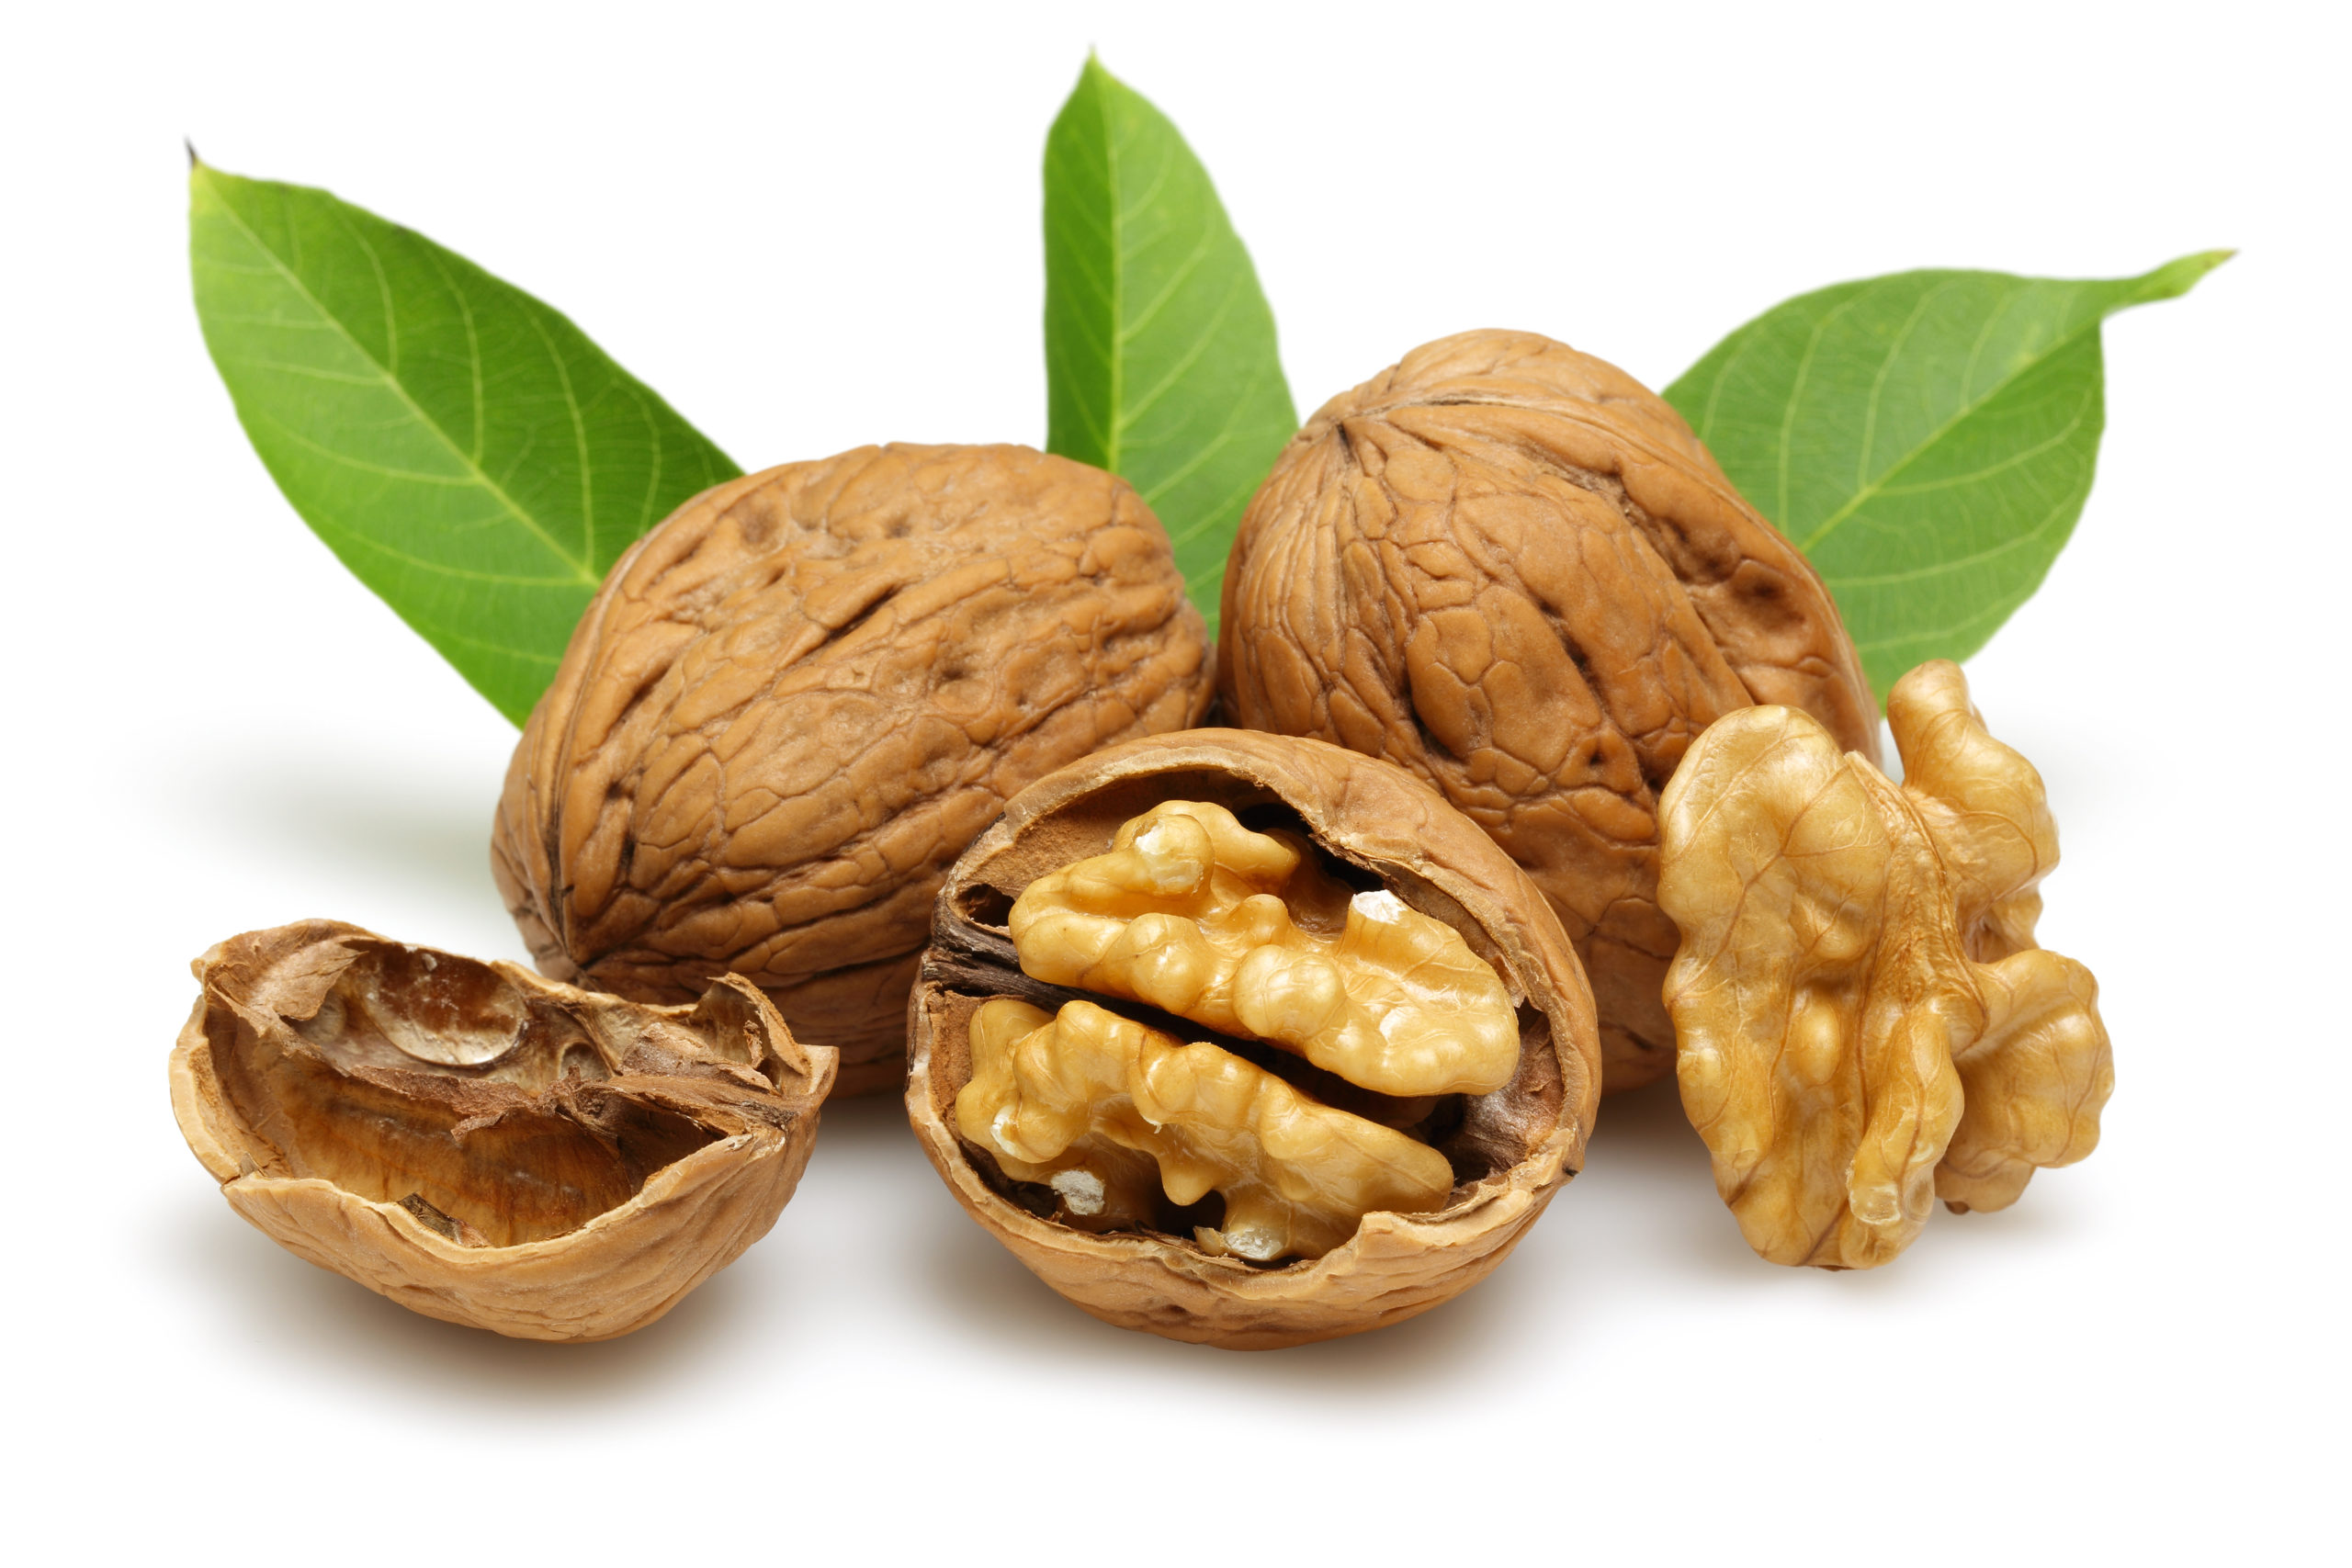 6 Proven Health Benefits of Eating Walnuts